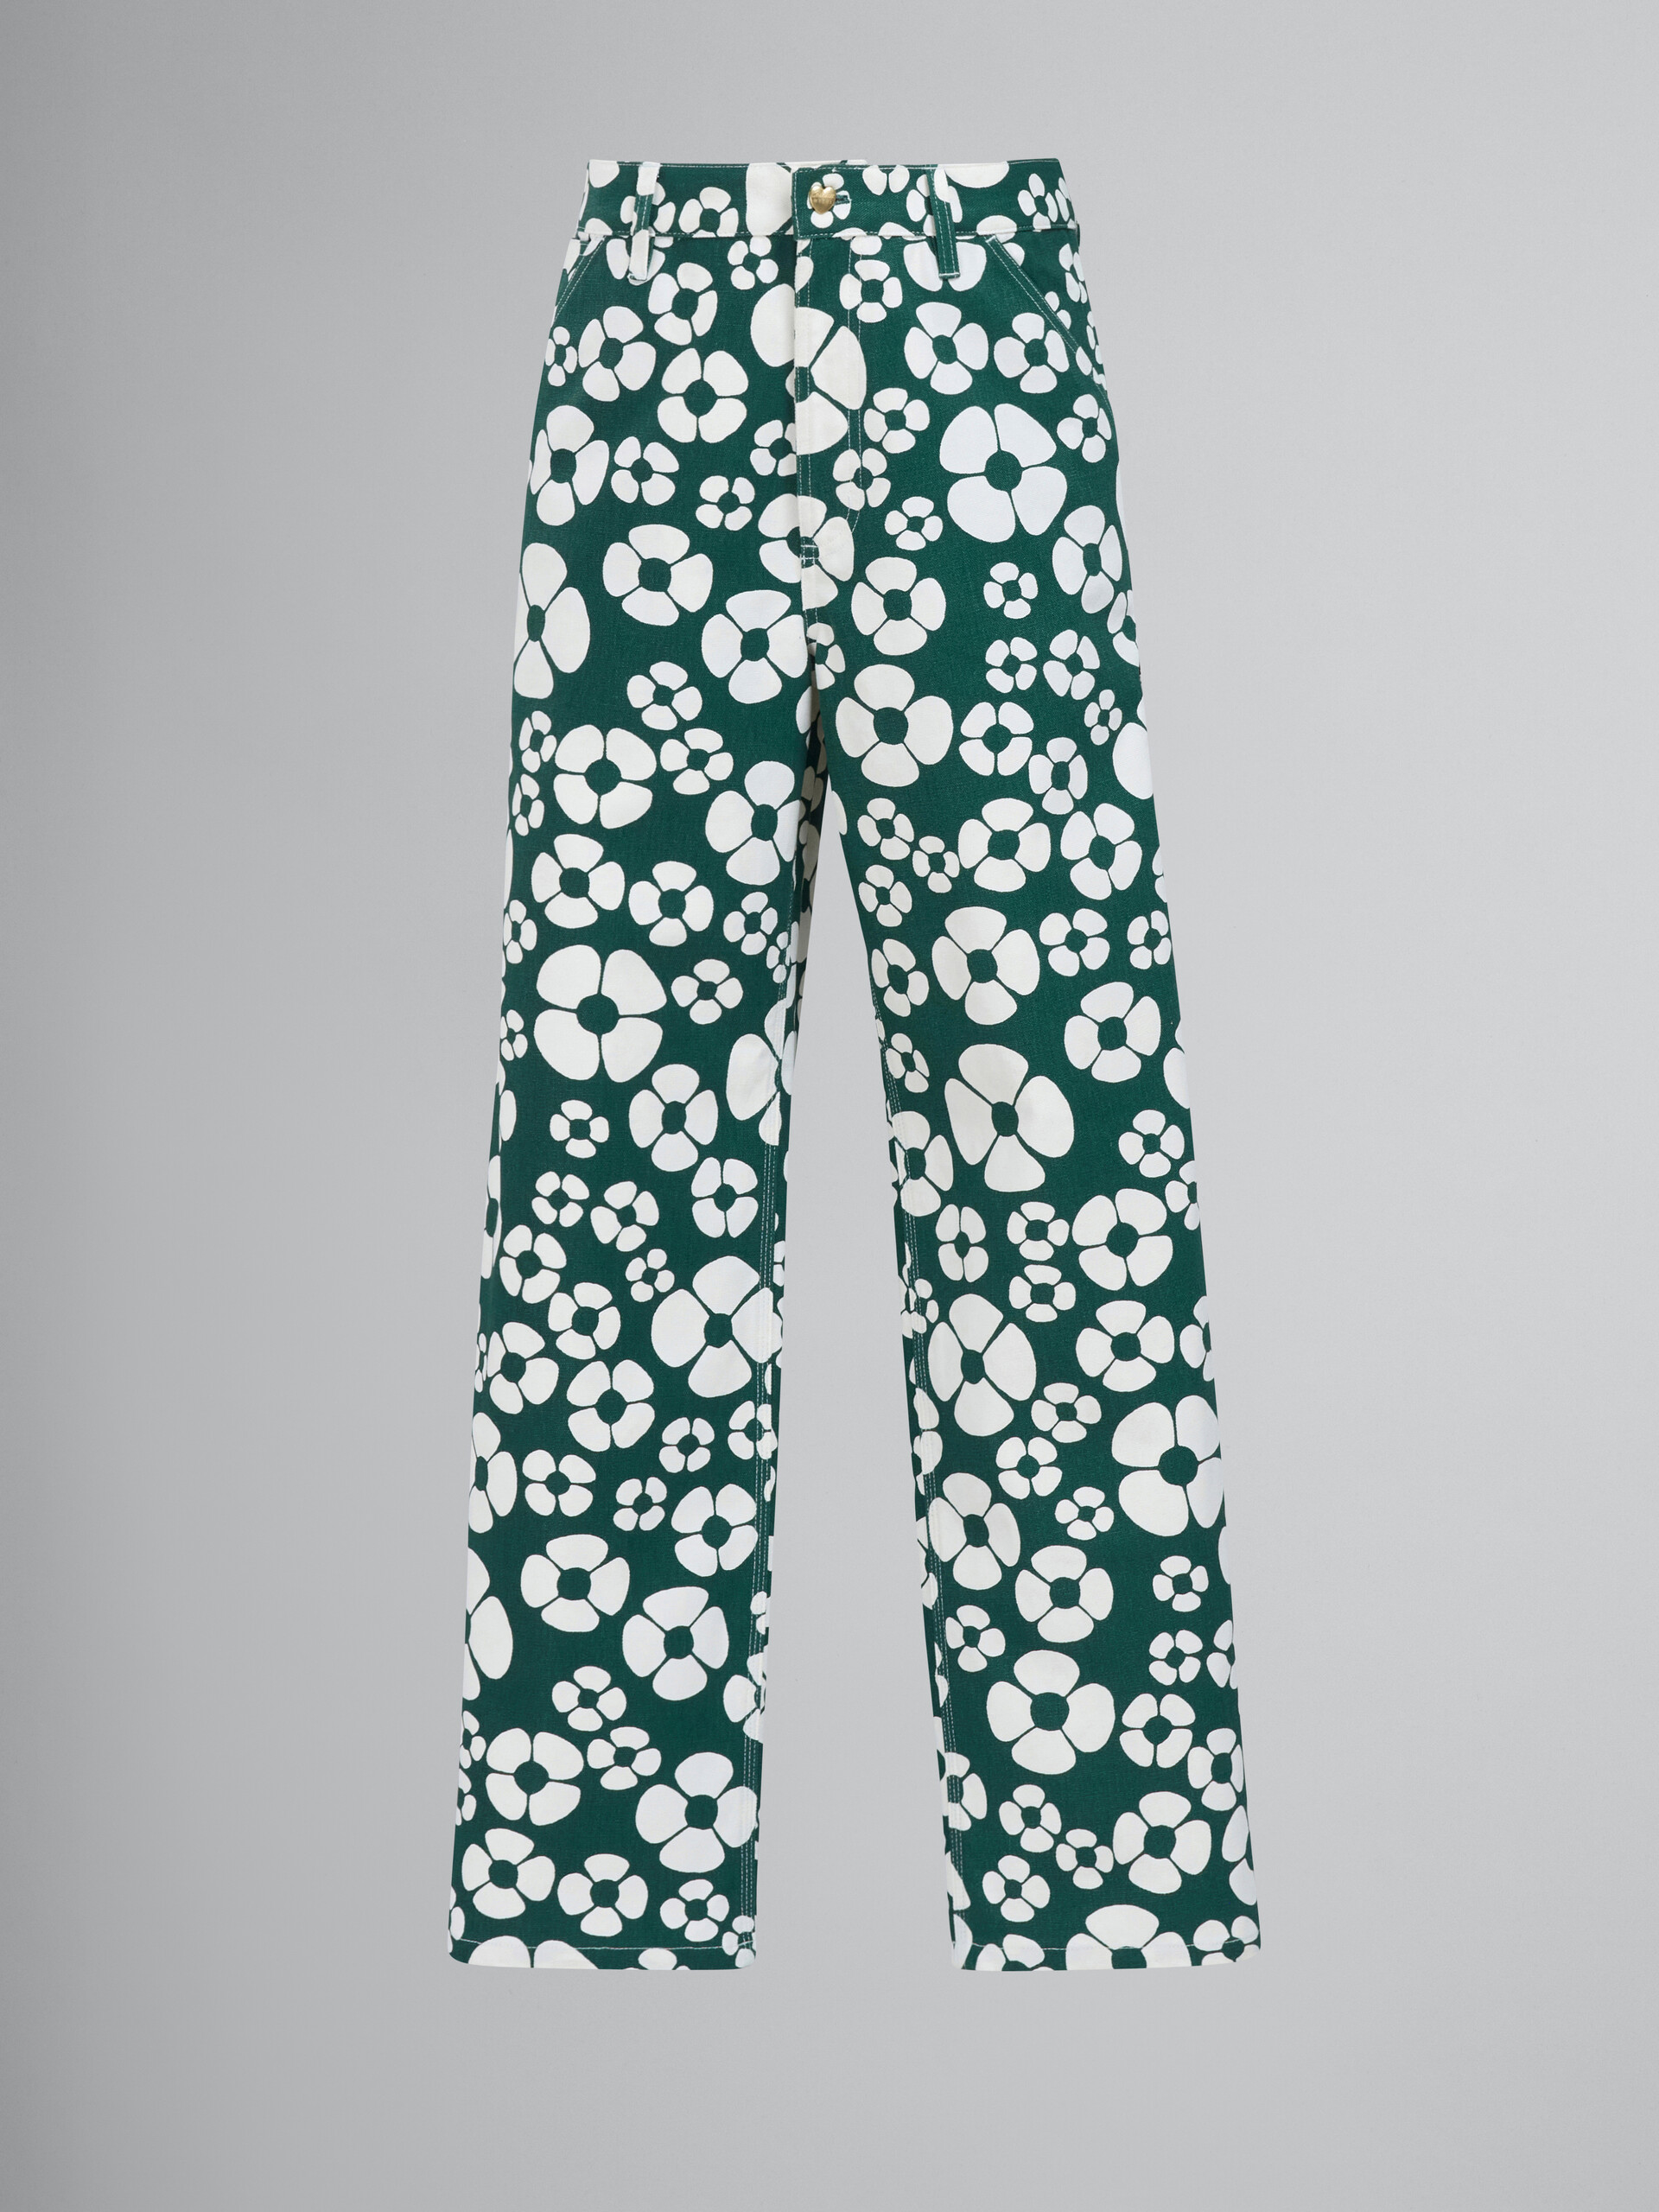 MARNI x CARHARTT WIP - green floral trousers - Pants - Image 1